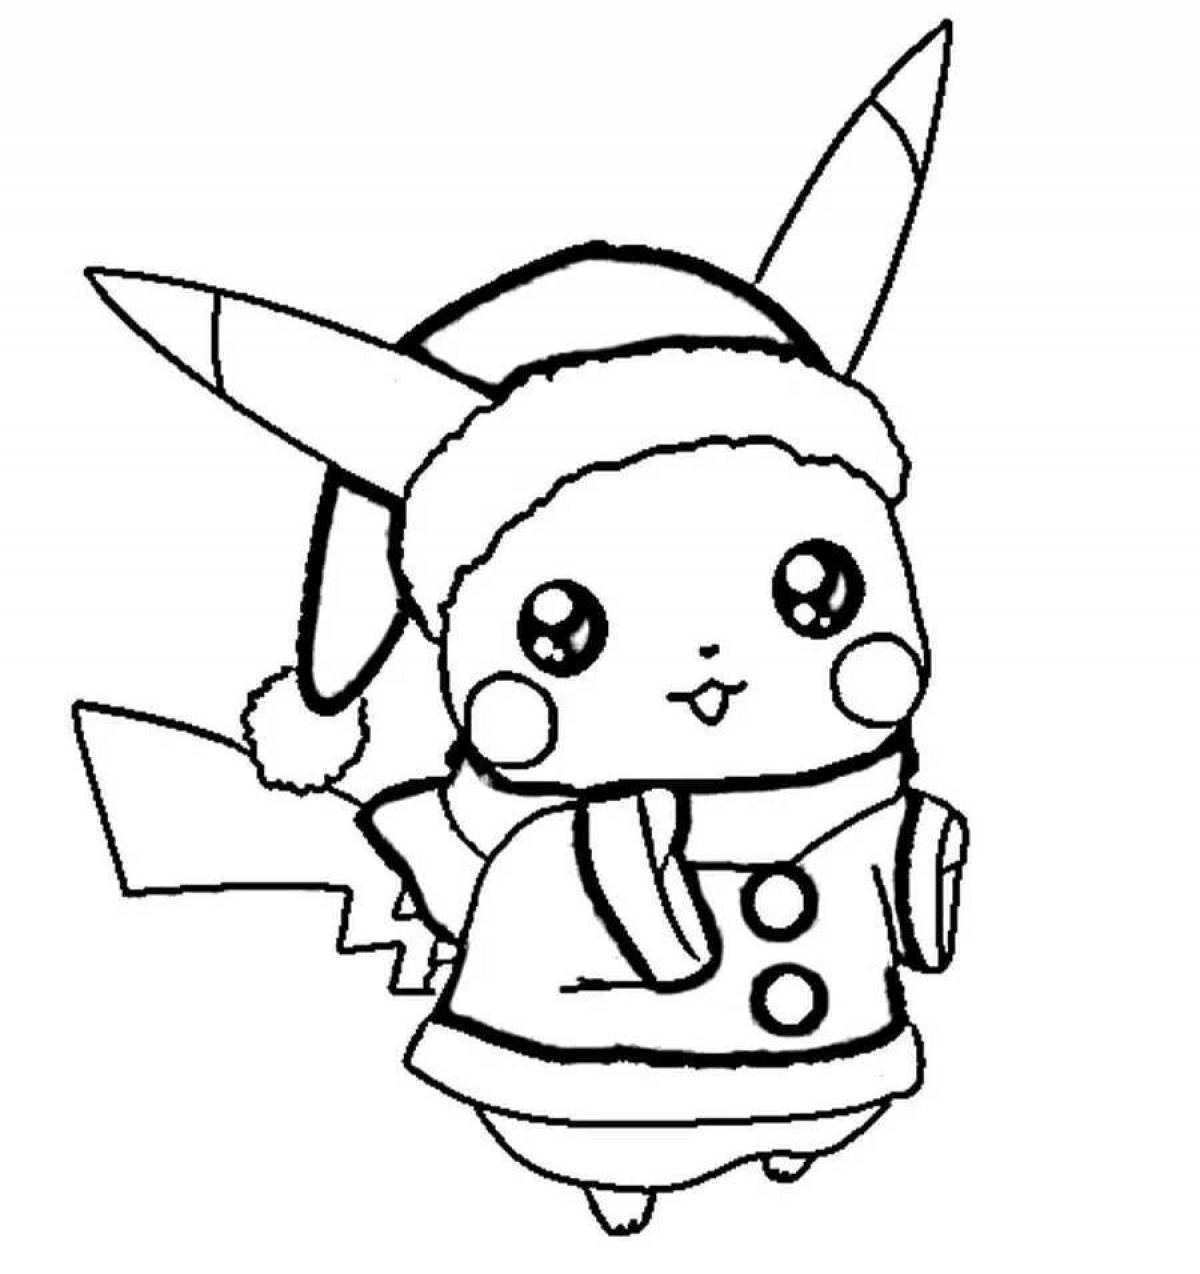 Awesome pikachu anime coloring book